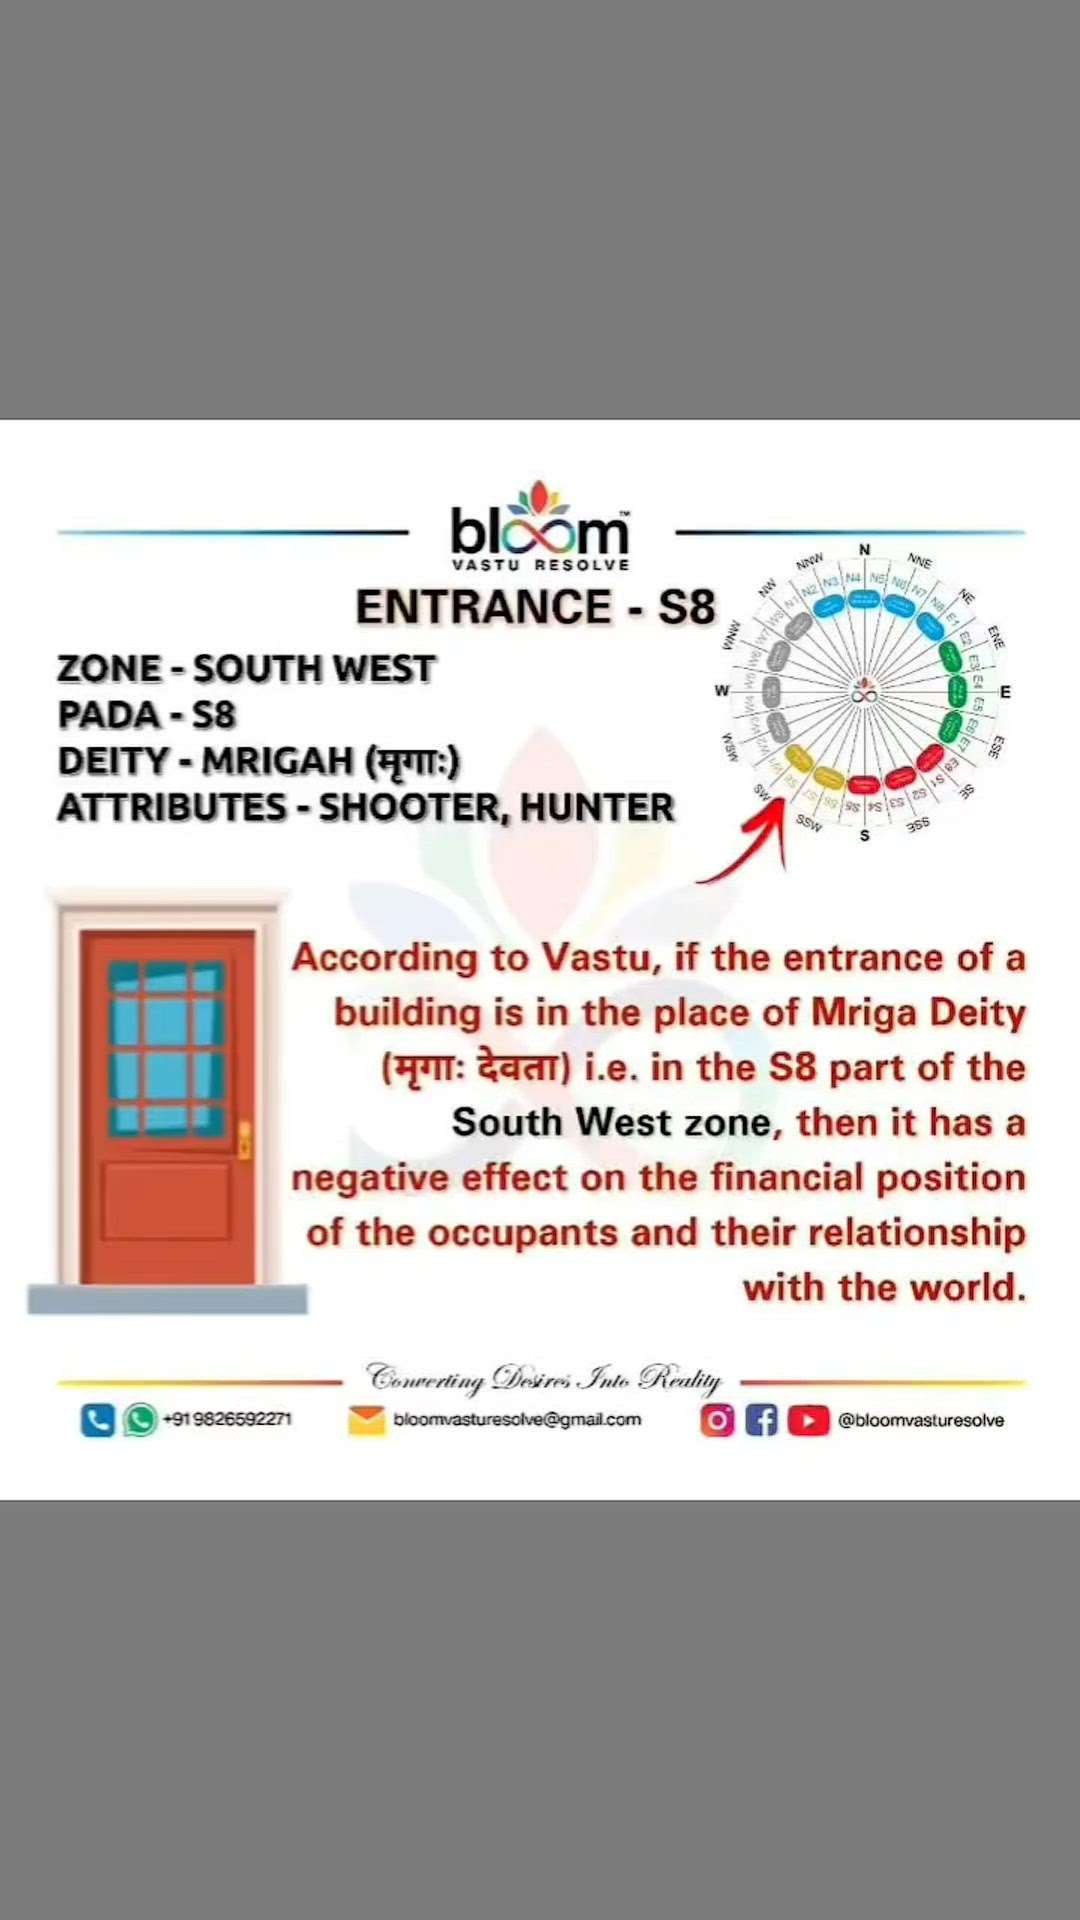 Your queries and comments are always welcome.
For more Vastu please follow @bloomvasturesolve
on YouTube, Instagram & Facebook
.
.
For personal consultation, feel free to contact certified MahaVastu Expert through
M - 9826592271
Or
bloomvasturesolve@gmail.com
#vastu #वास्तु #mahavastu #mahavastuexpert #bloomvasturesolve  #vastureels #vastulogy #vastuexpert  #vasturemedies  #vastuforhome #vastuforpeace #vastudosh #numerology #entrance #swzone  #maingate #door